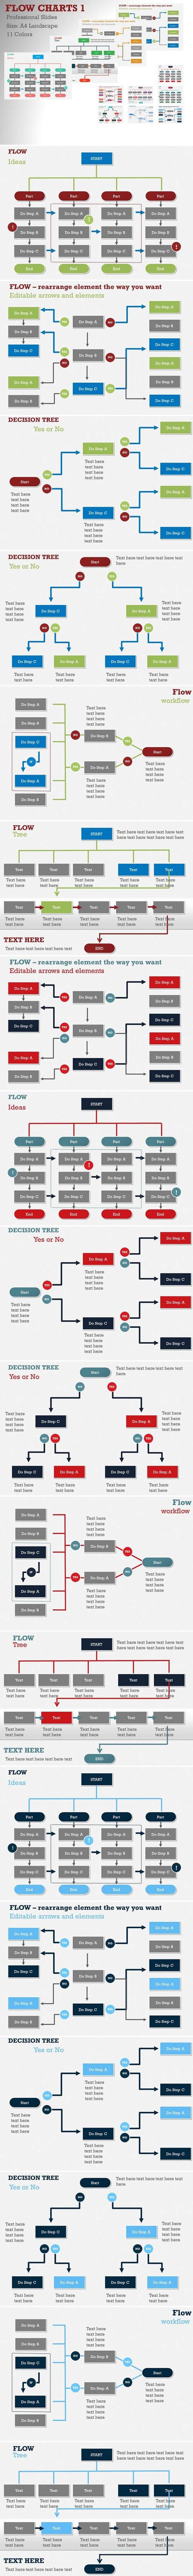 CM - Flow Charts 1 PowerPoint Template 406958